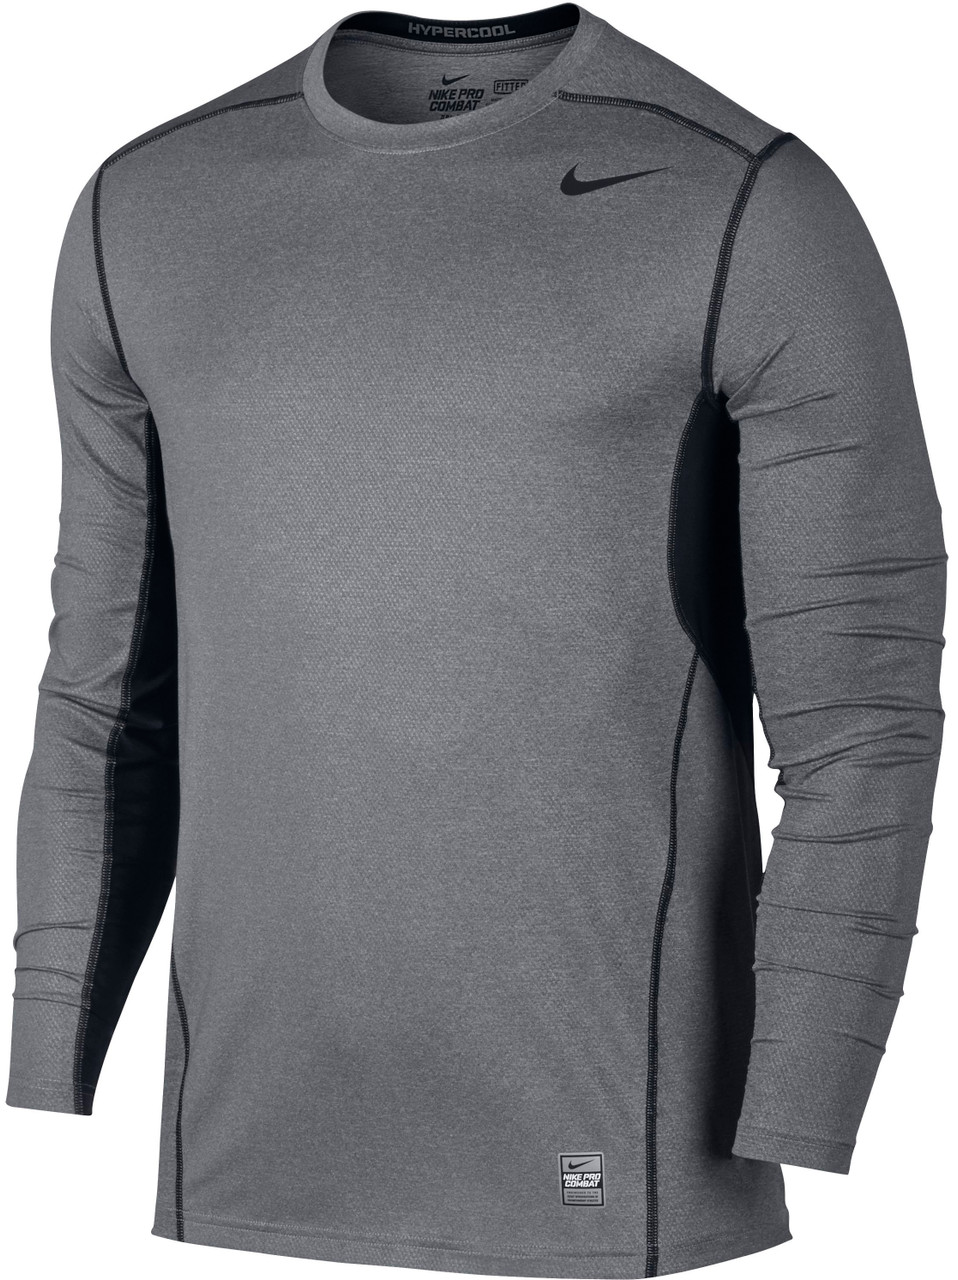 Nike Pro Combat Hypercool 3.0 Compression Top Daring Red 3XL 653794-647,  Shirts -  Canada